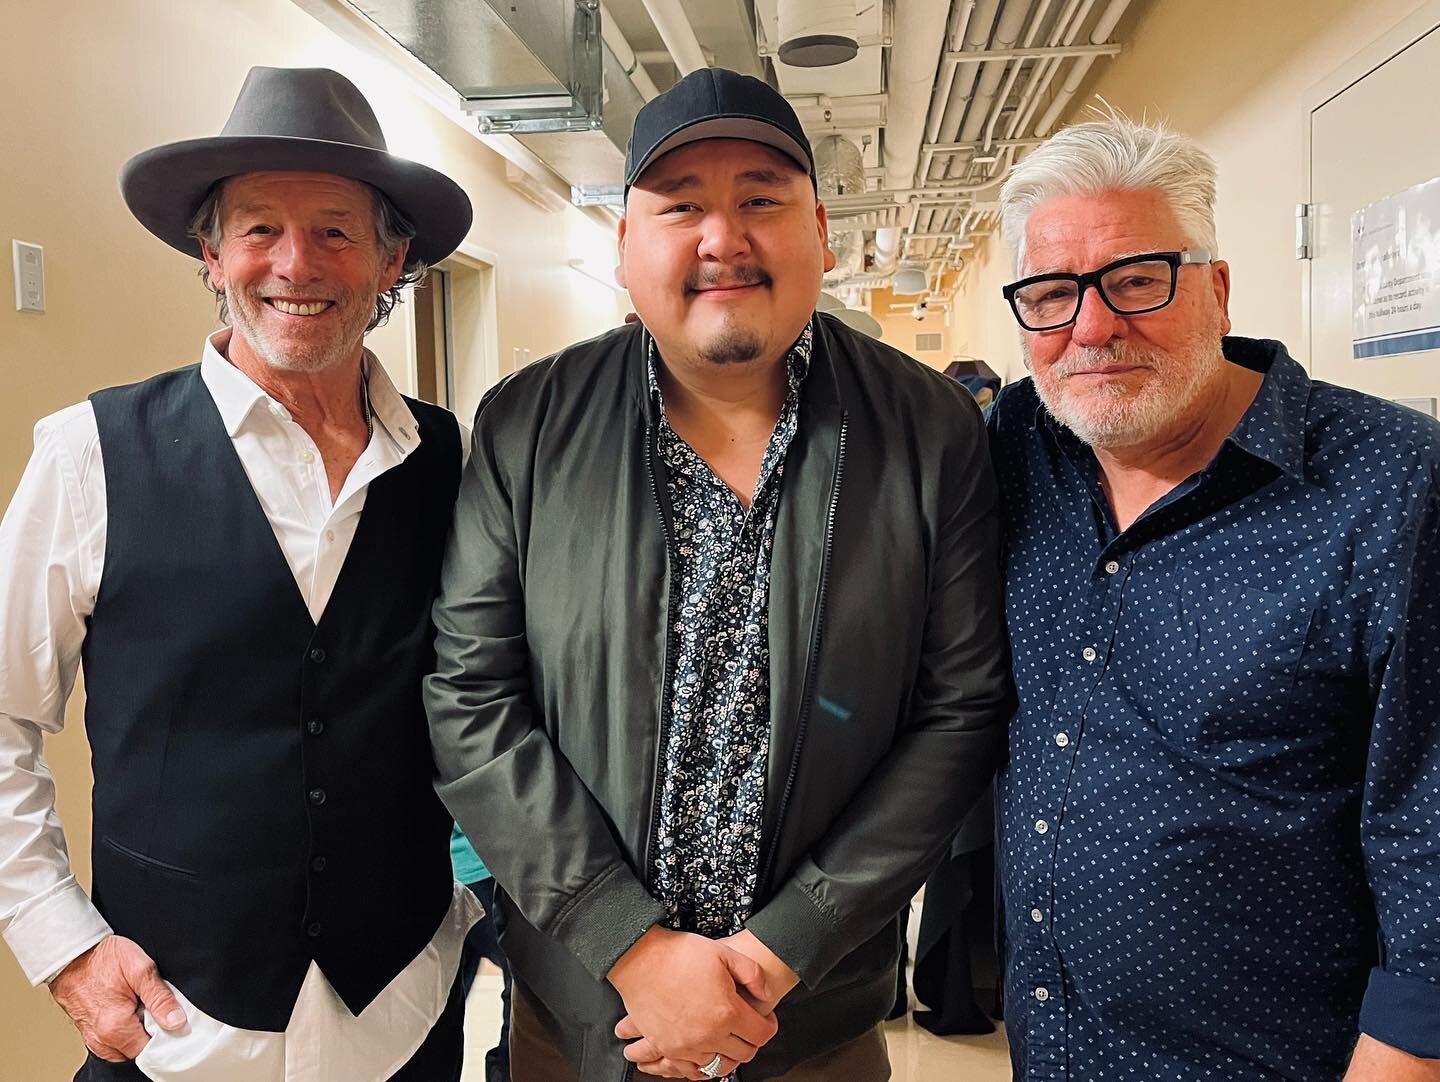 Kicked off the 19th season of The Cariboo Express at the Bella Concert Hall in Calgary last night. It&rsquo;s off to a great start with a sold out show. An honour to have William Prince as our special guest. Love this shot with William and my friend 